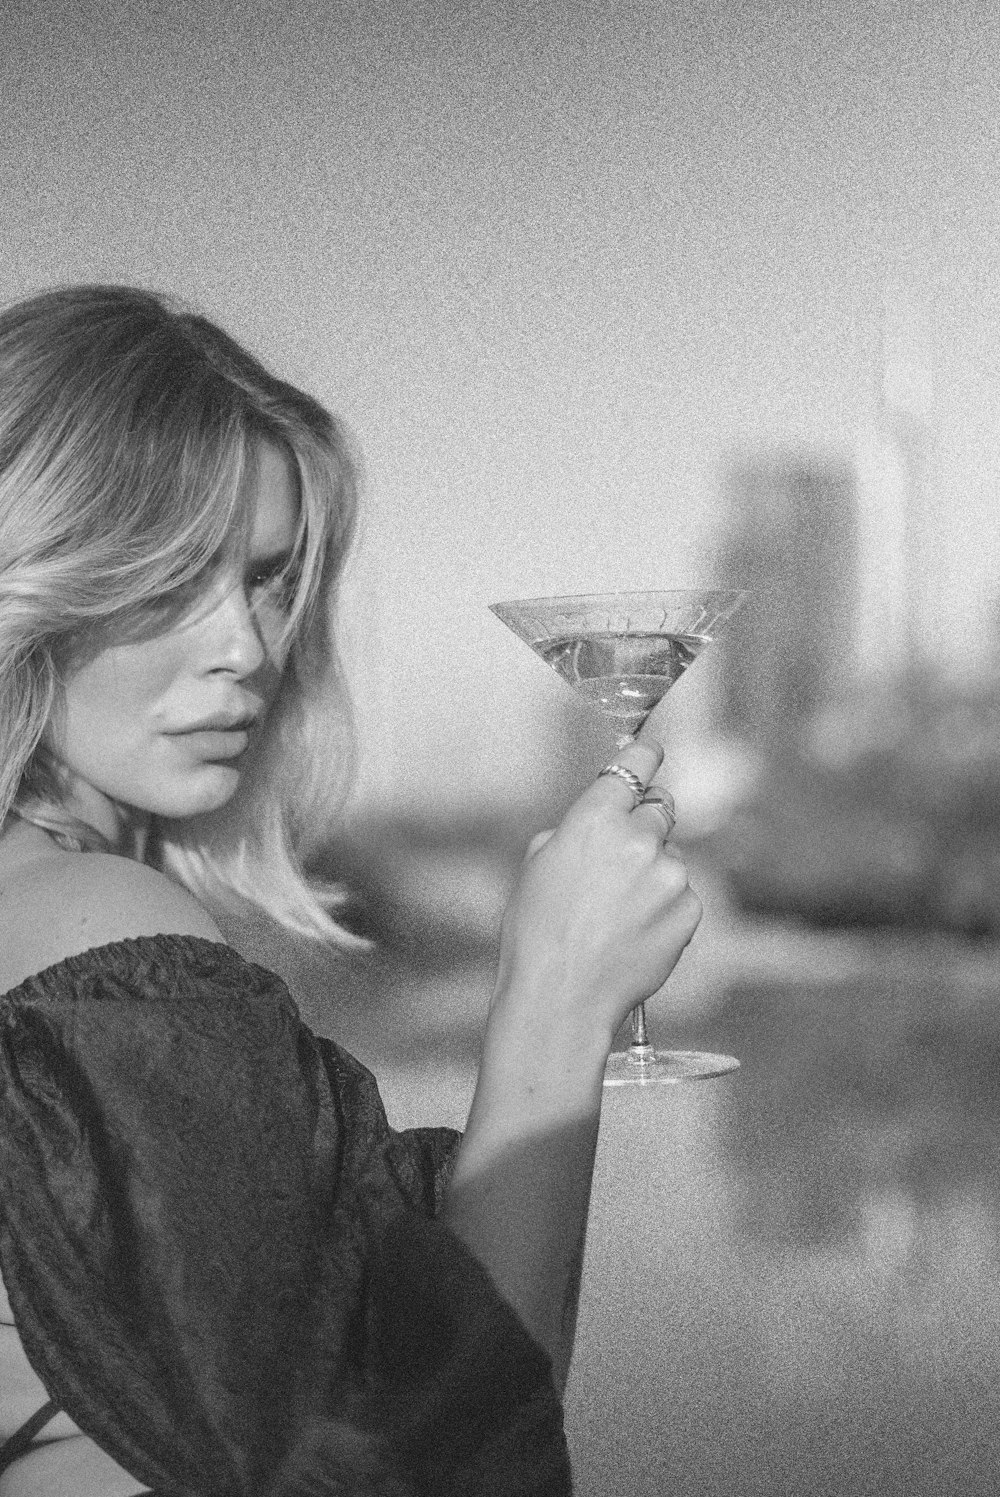 a woman holding a martini glass in her hand